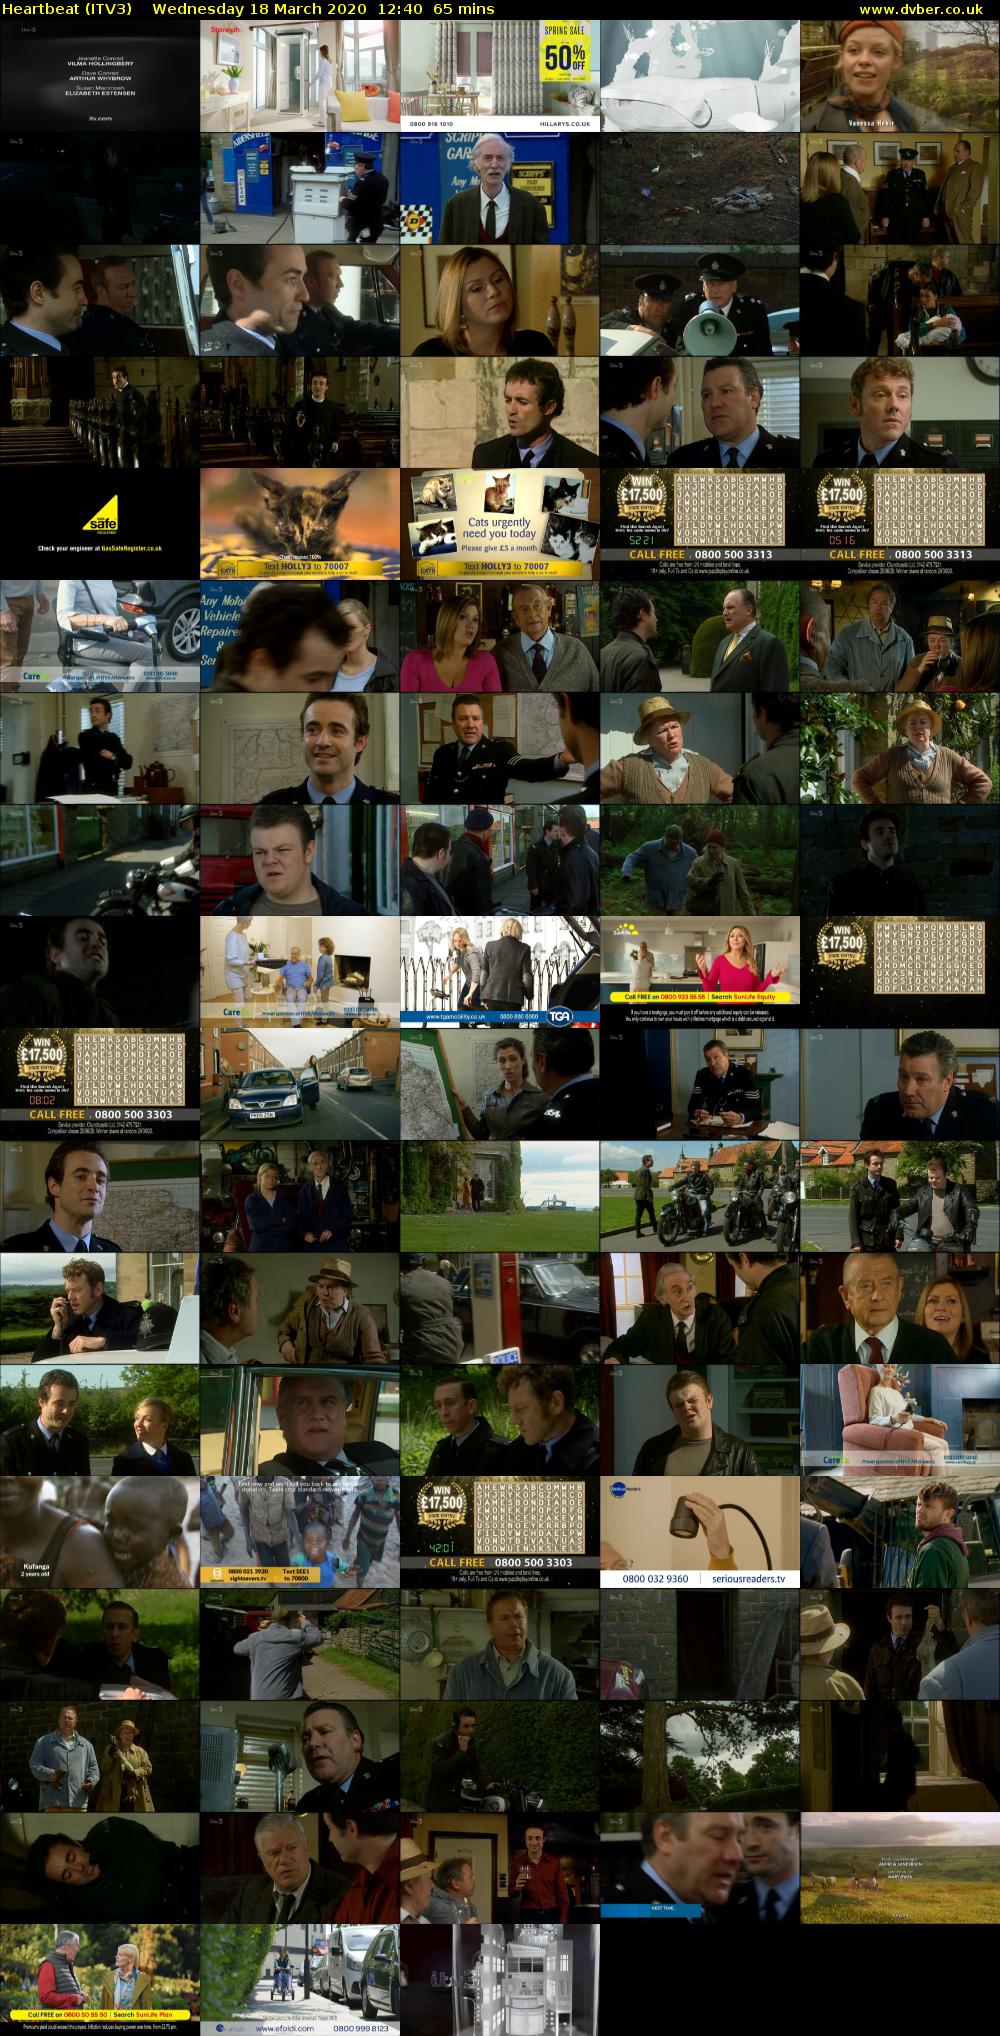 Heartbeat (ITV3) Wednesday 18 March 2020 12:40 - 13:45